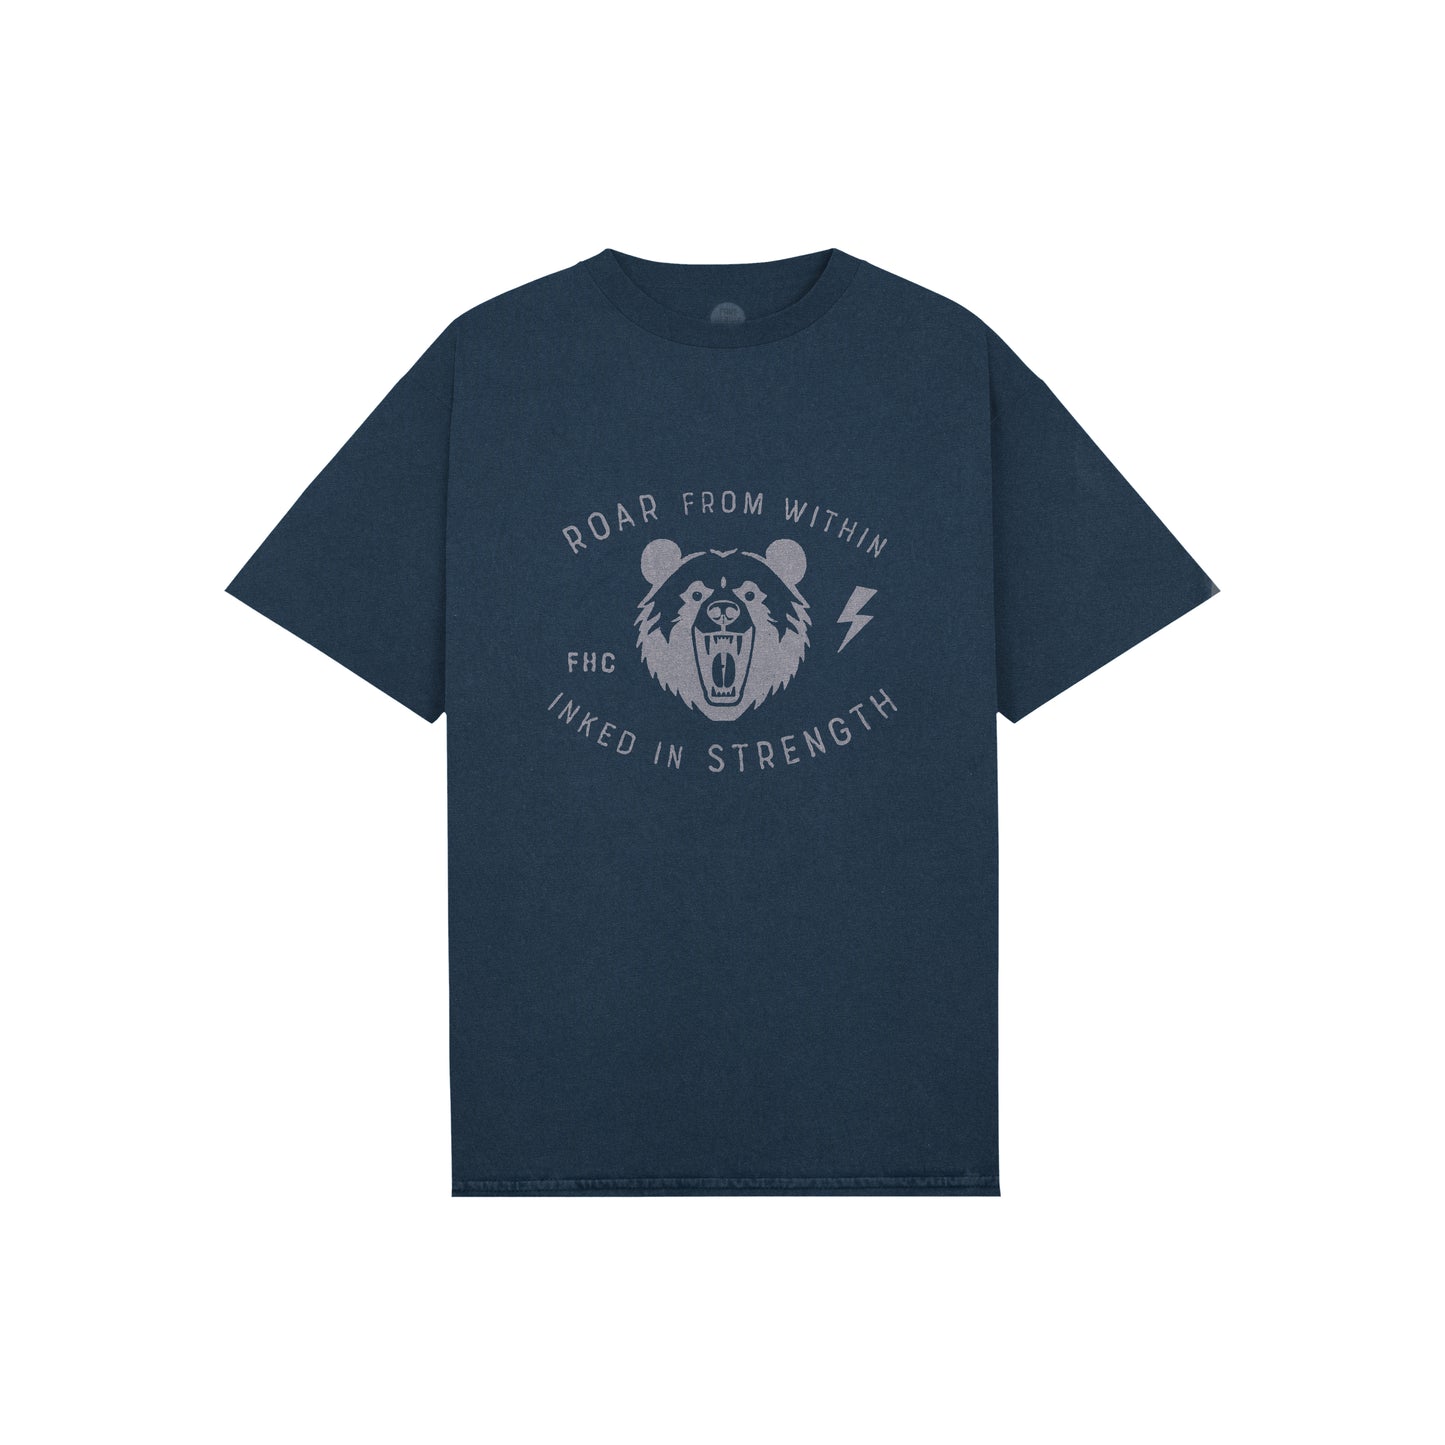 ROAR FROM WITHIN STONEWASH T-SHIRT